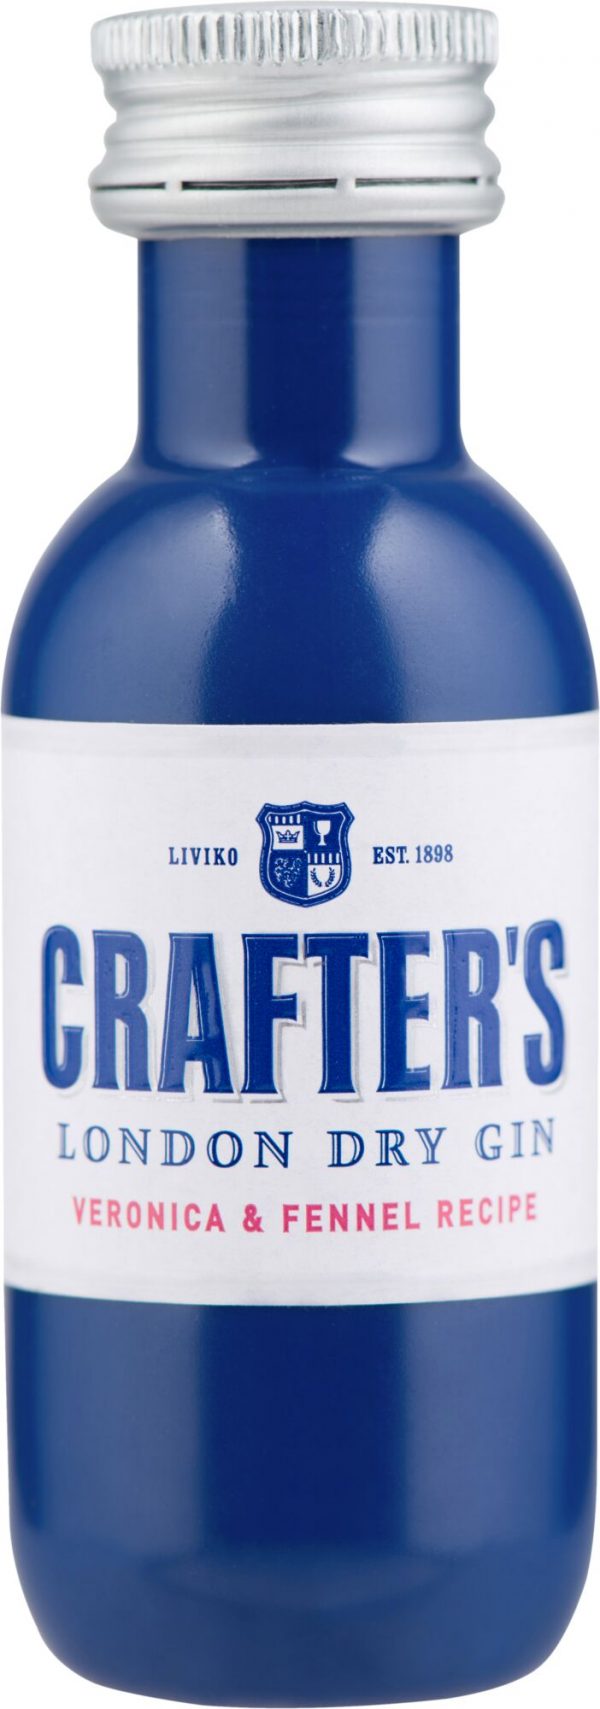 Crafter's London Dry Gin 4cl